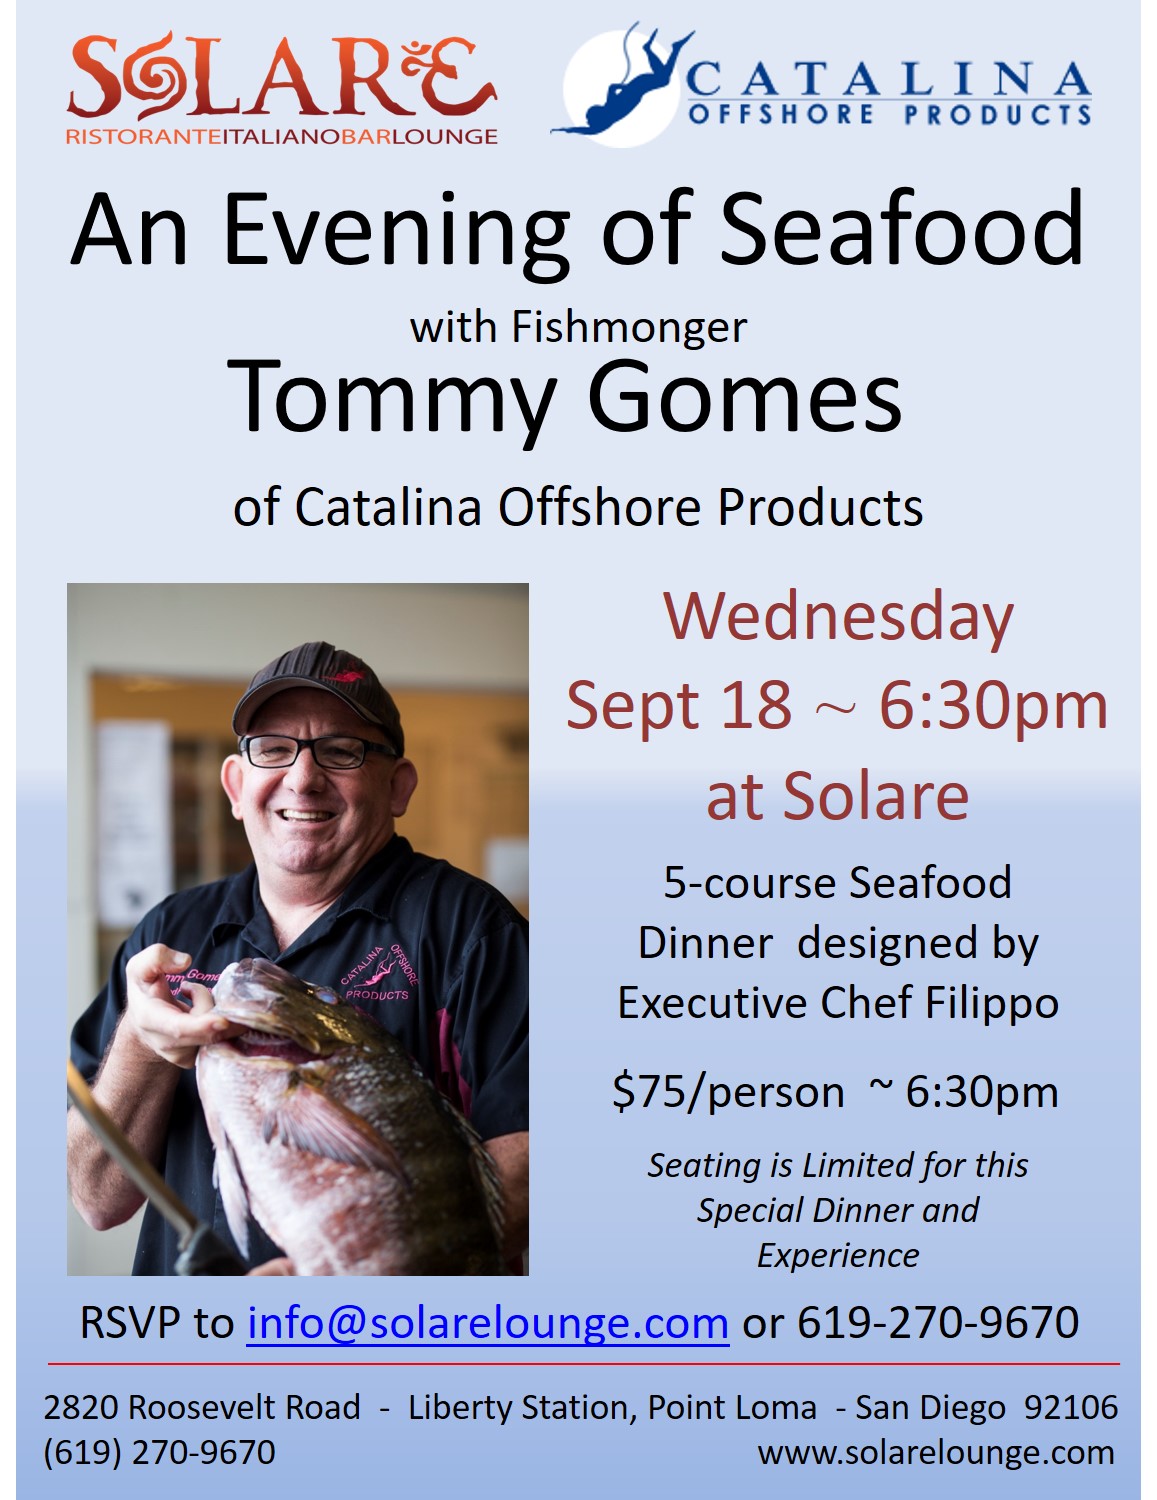 <a id="Solare-Seafood-TommyGomes-Dinner"></a>Tommy Gomes & Catalina OP Seafood Dinner at Solare